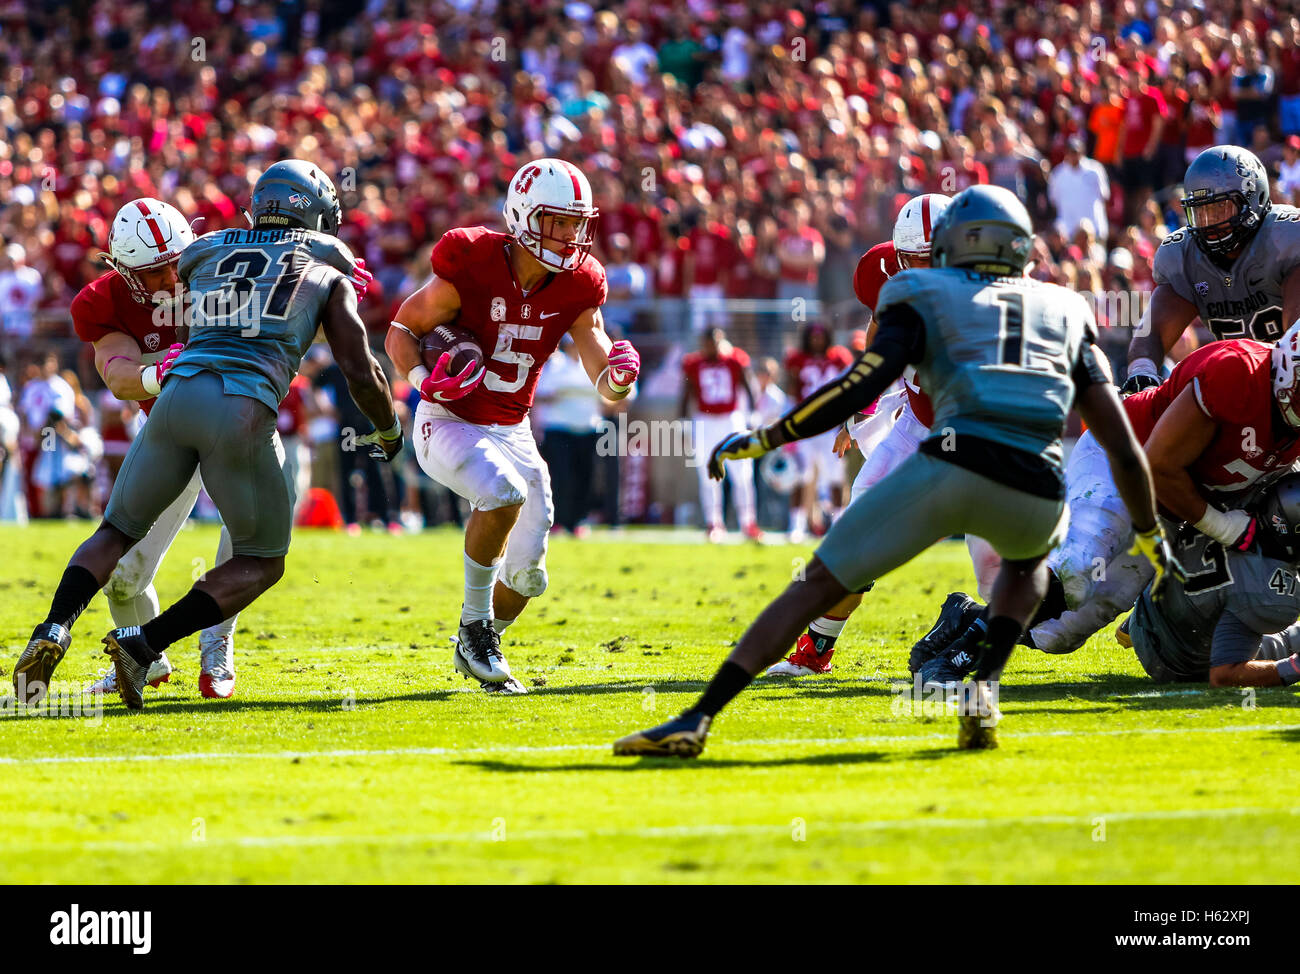 Palo Alto, California, USA. 22nd Oct, 2016. Stanford Running Back Christian McCaffrey (5) navigates a big hole in NCAA football action at Stanford University, featuring the Colorado Buffaloes visiting the Stanford Cardinal. Colorado won the game, 10-5. © Seth Riskin/ZUMA Wire/Alamy Live News Stock Photo